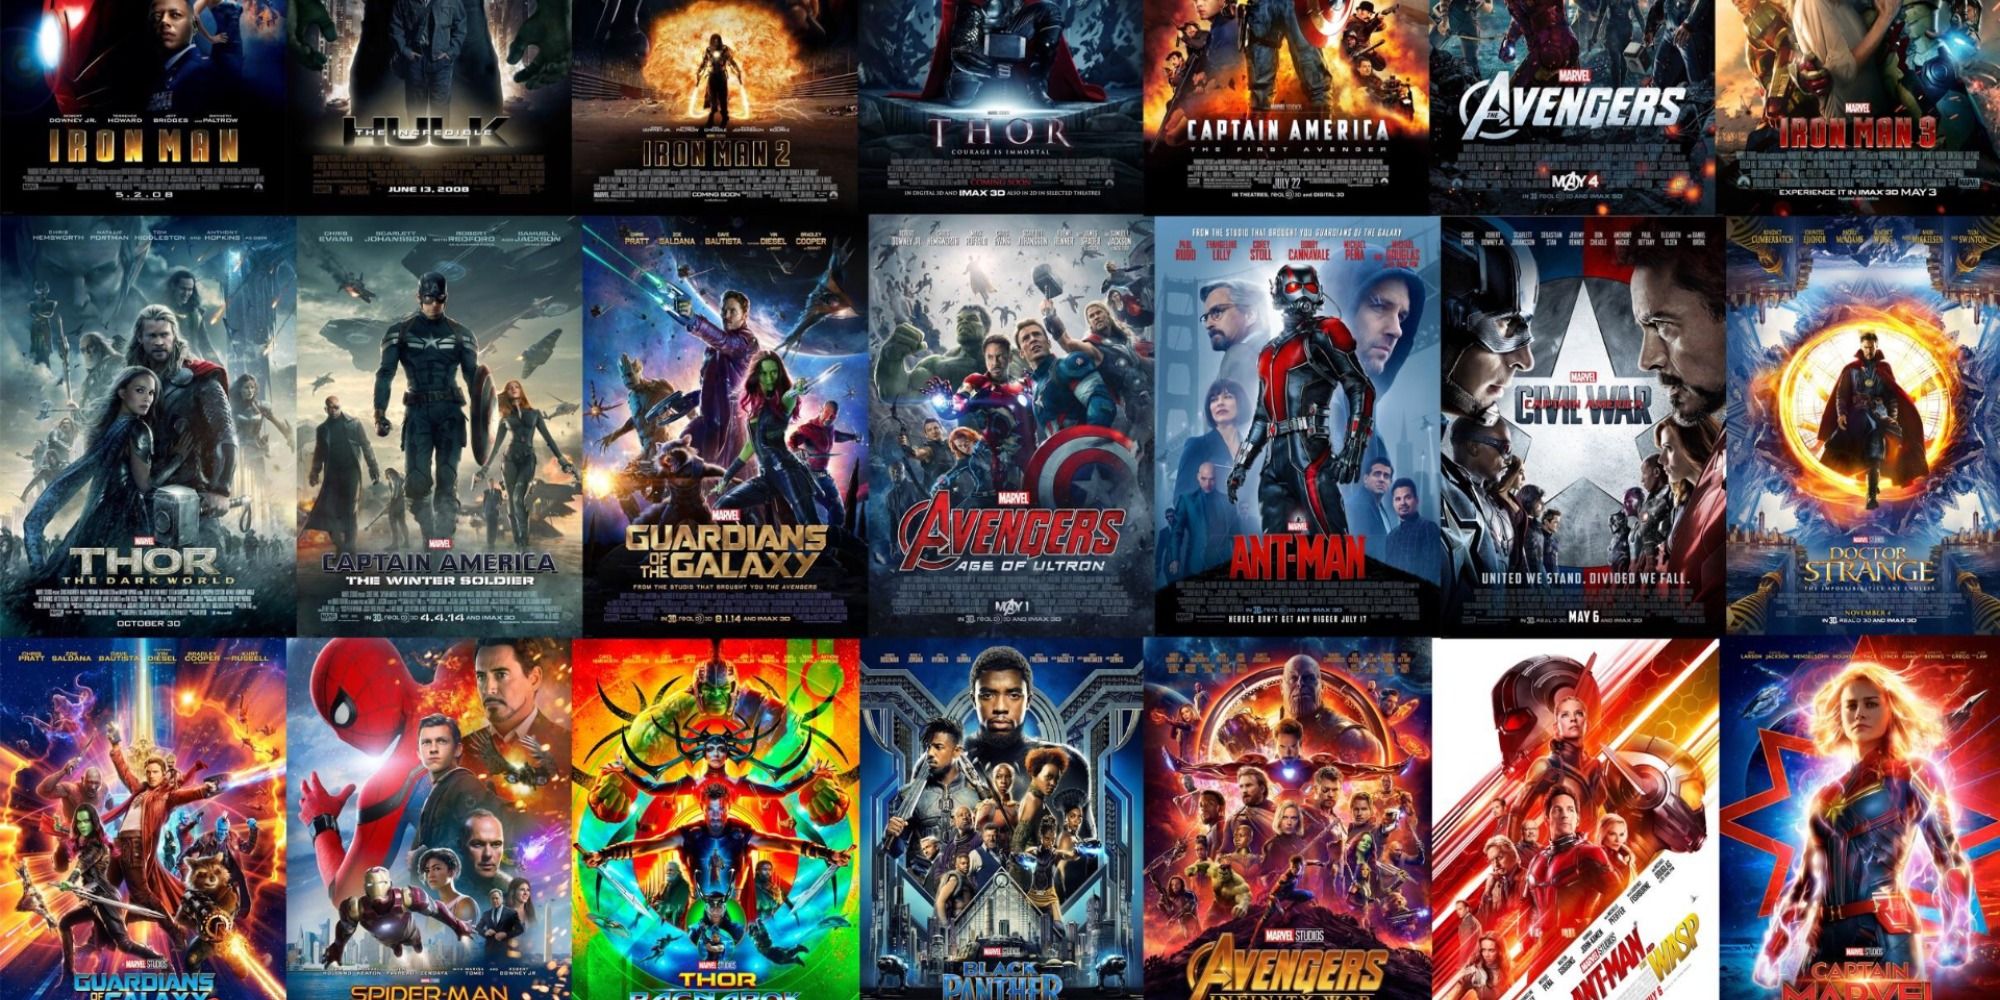 MCU & 9 Other Movie Franchises That Were Released Out of Chronological Order